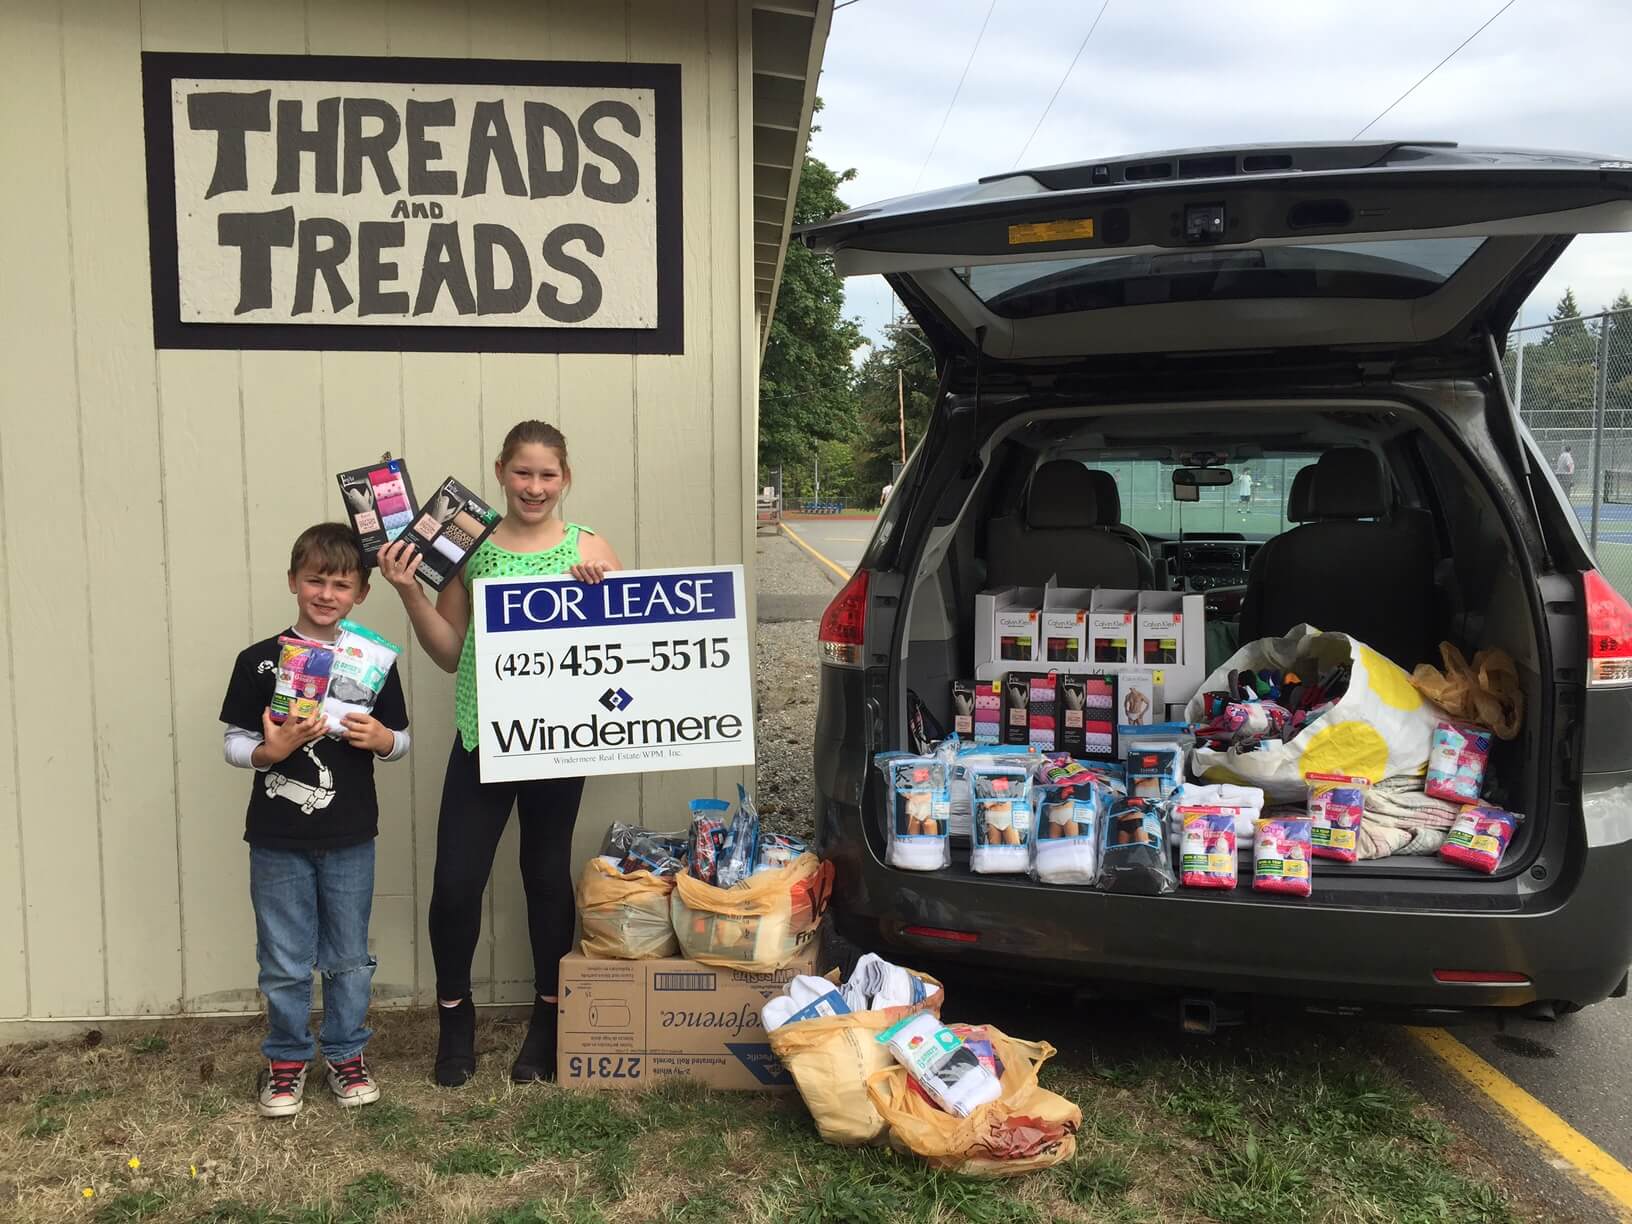 Threads and Treads Donation Benefits Those in Need